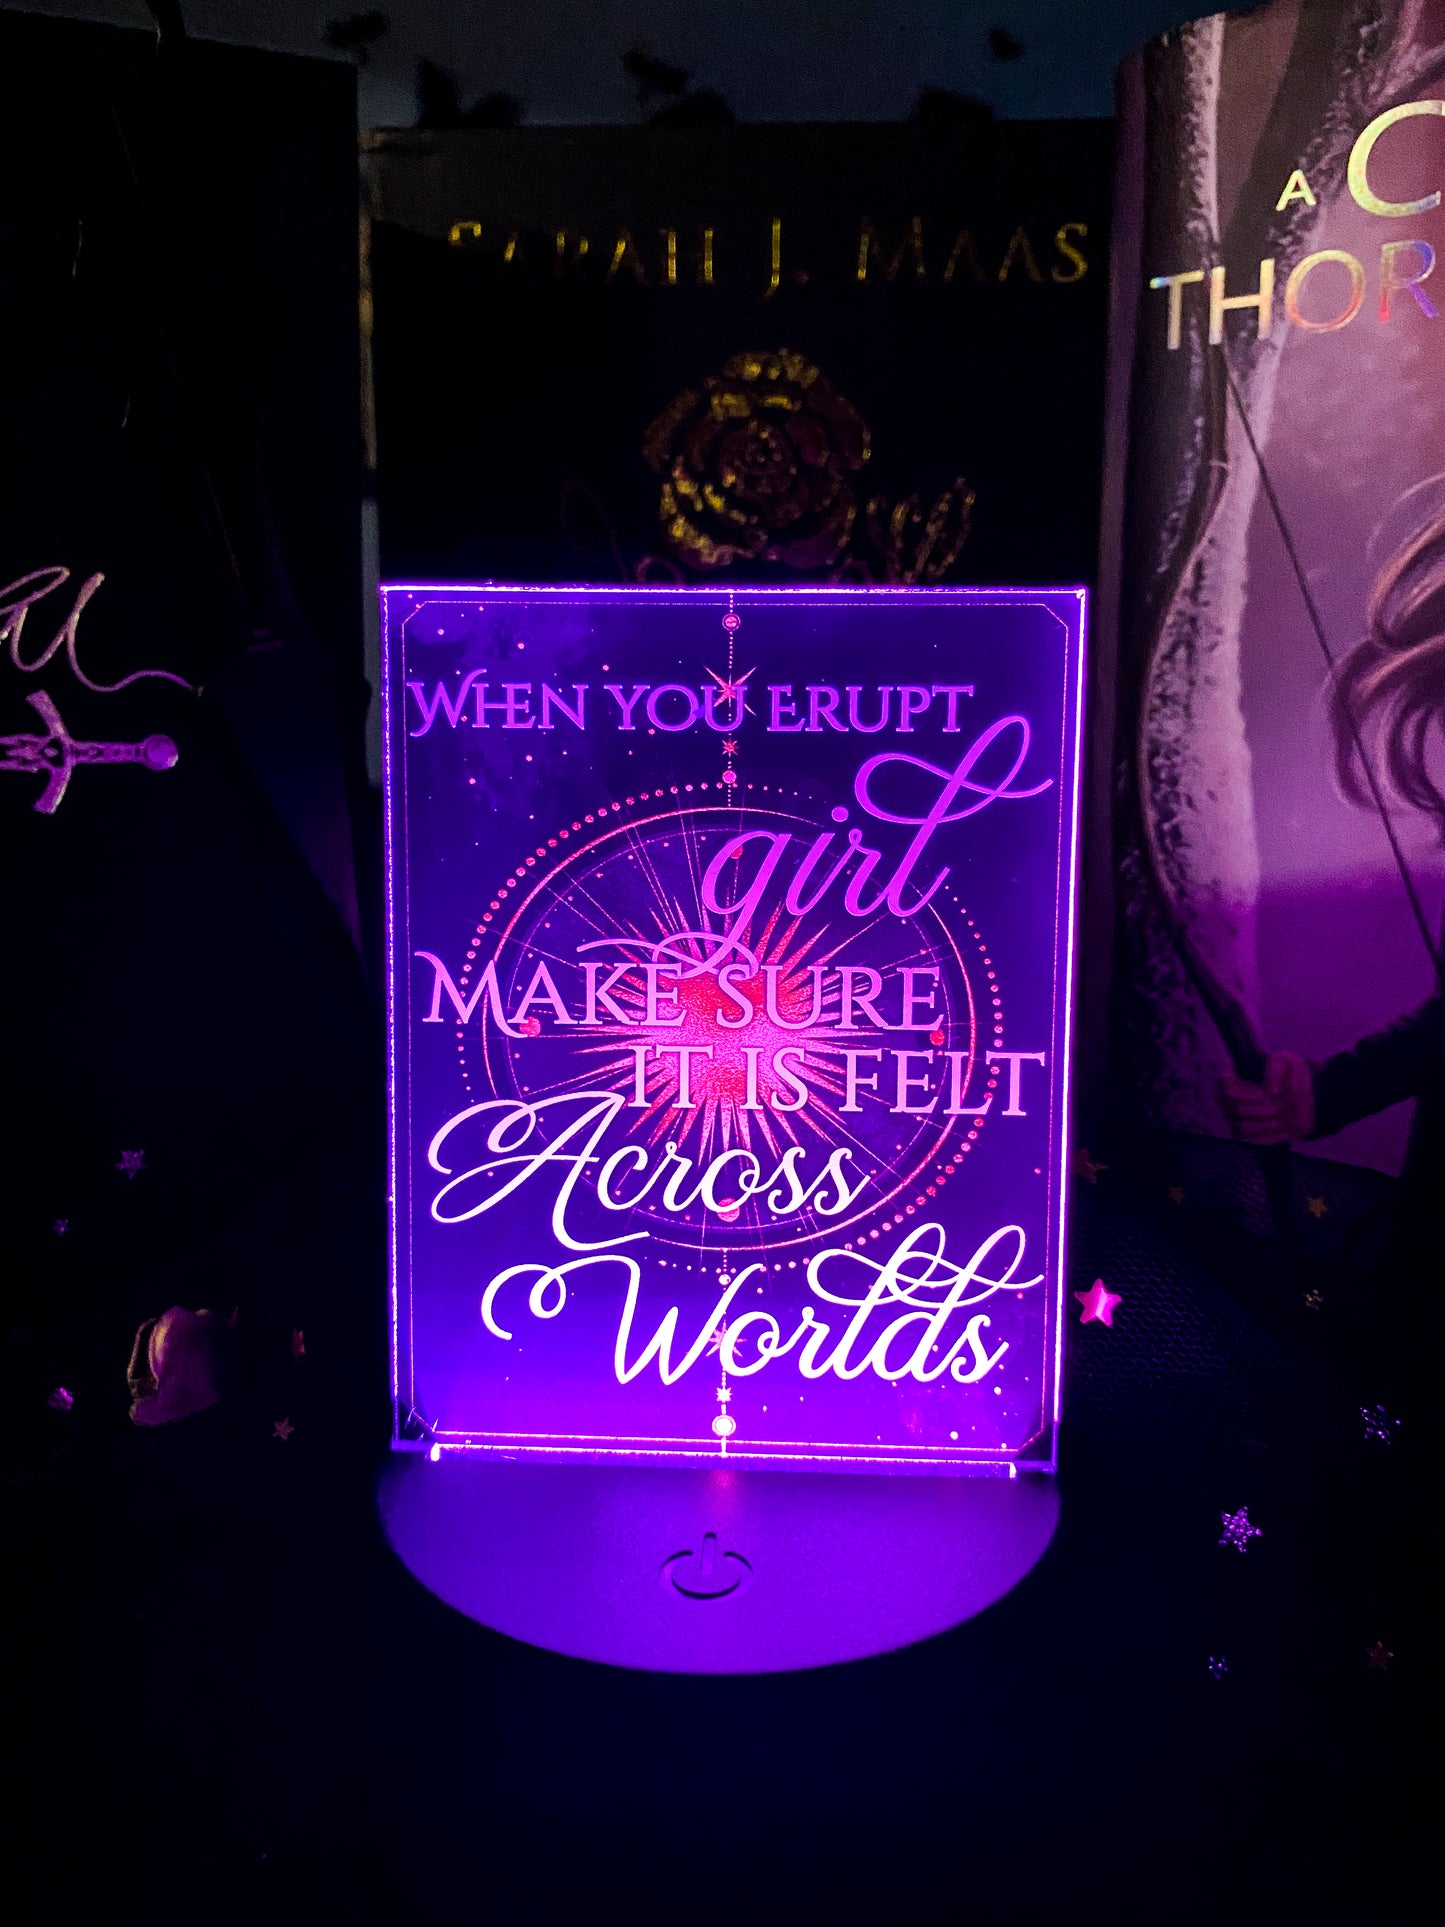 Light Up Bases & Designs - Officially licensed by Sarah J. Maas